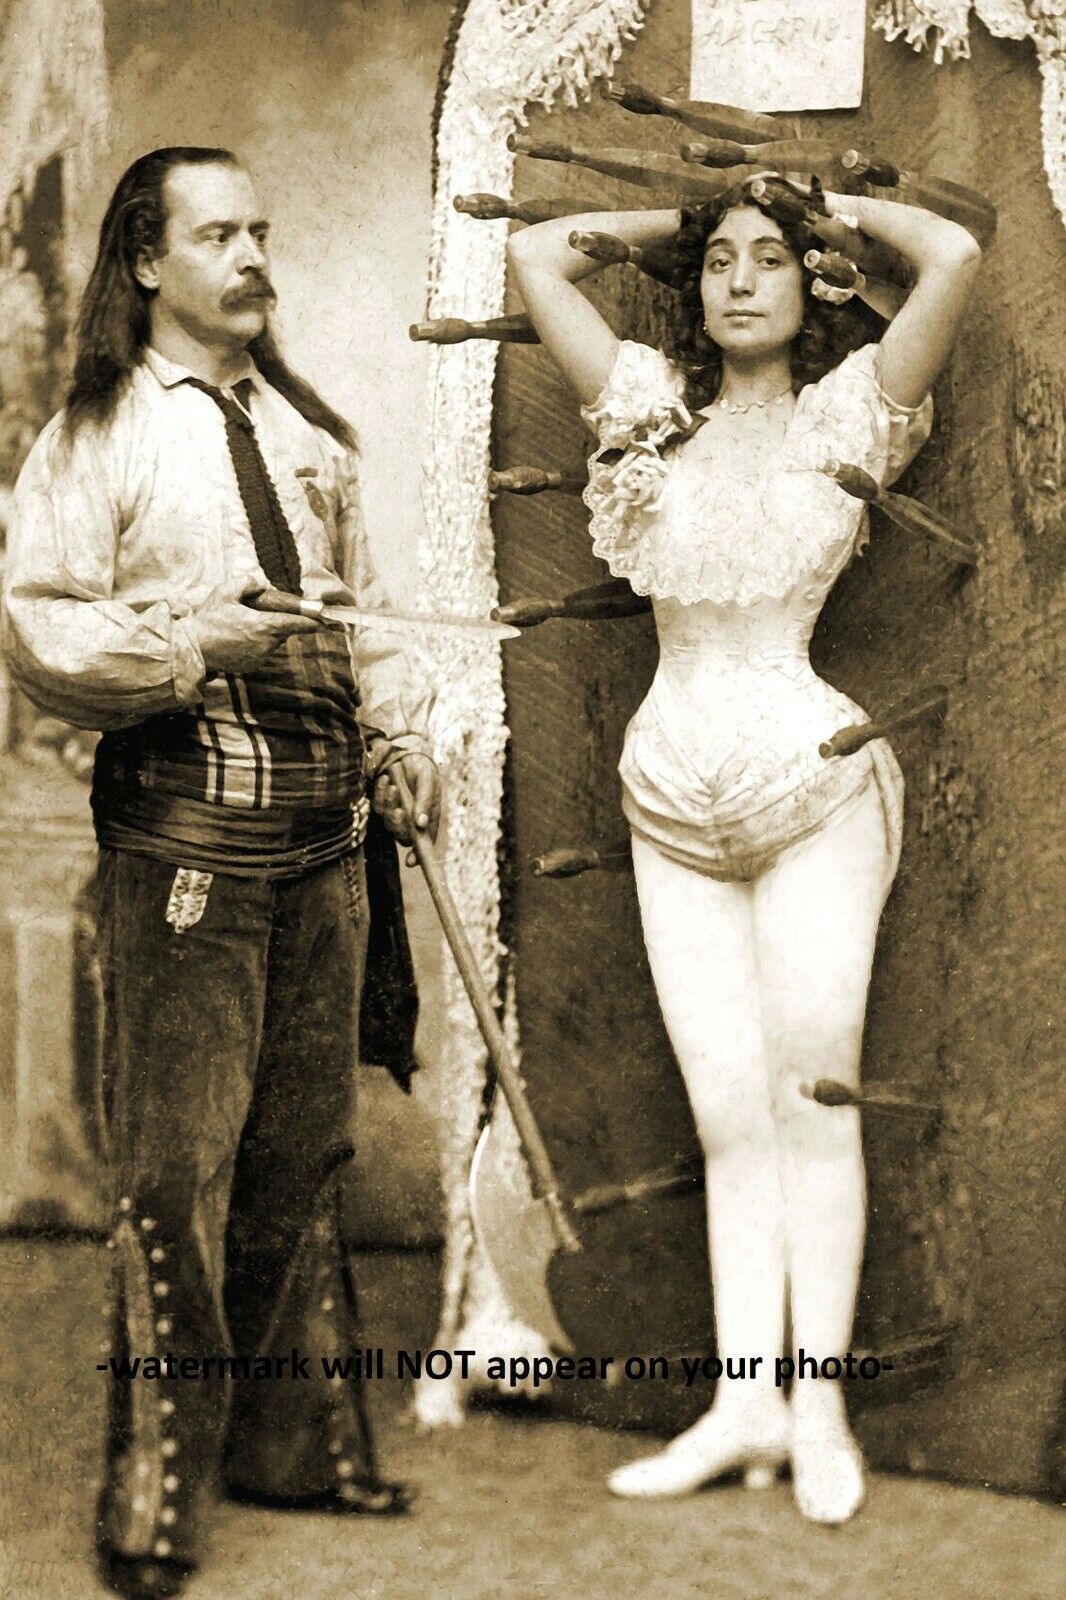  Vintage Scary Knife Thrower Girl PHOTO Circus Carnival Sideshow Act Freak 1900